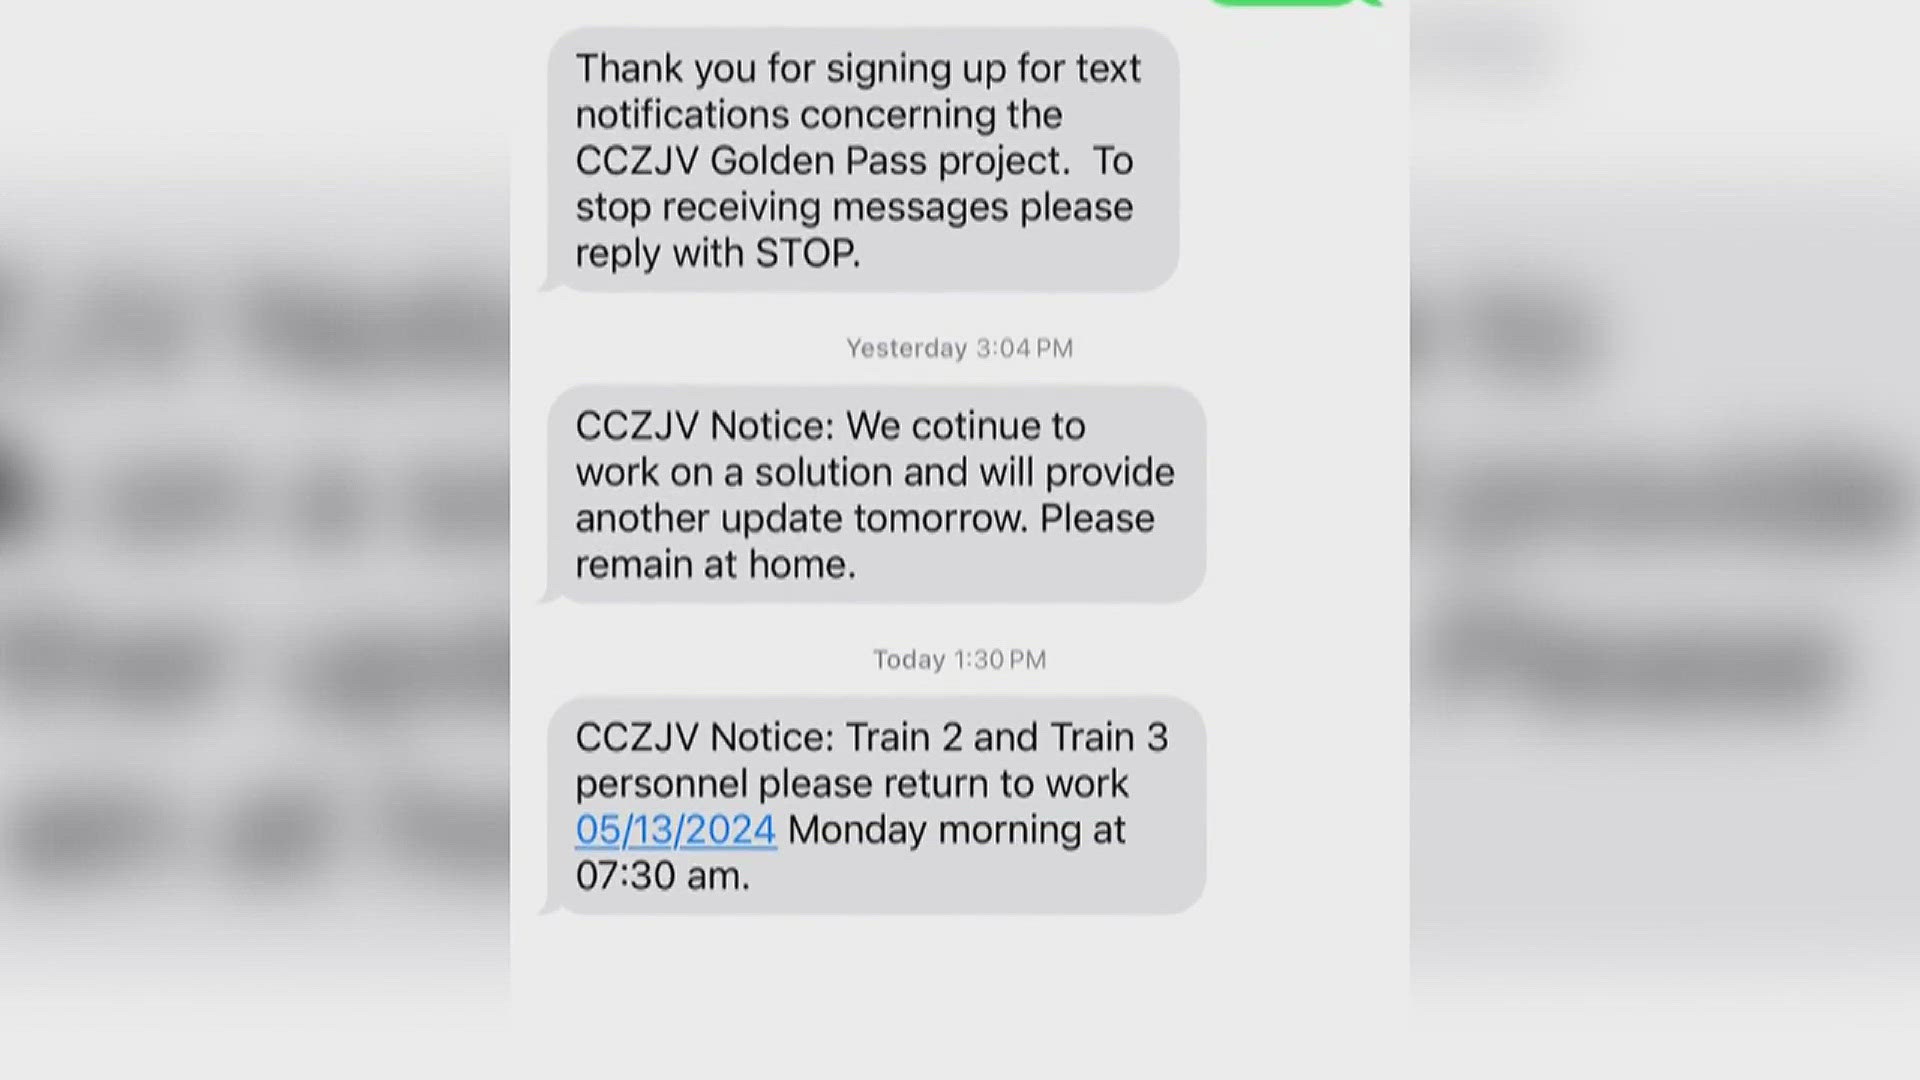 A text message sent to employees specified that only those who work on Train 2 and Train 3 can return to work.